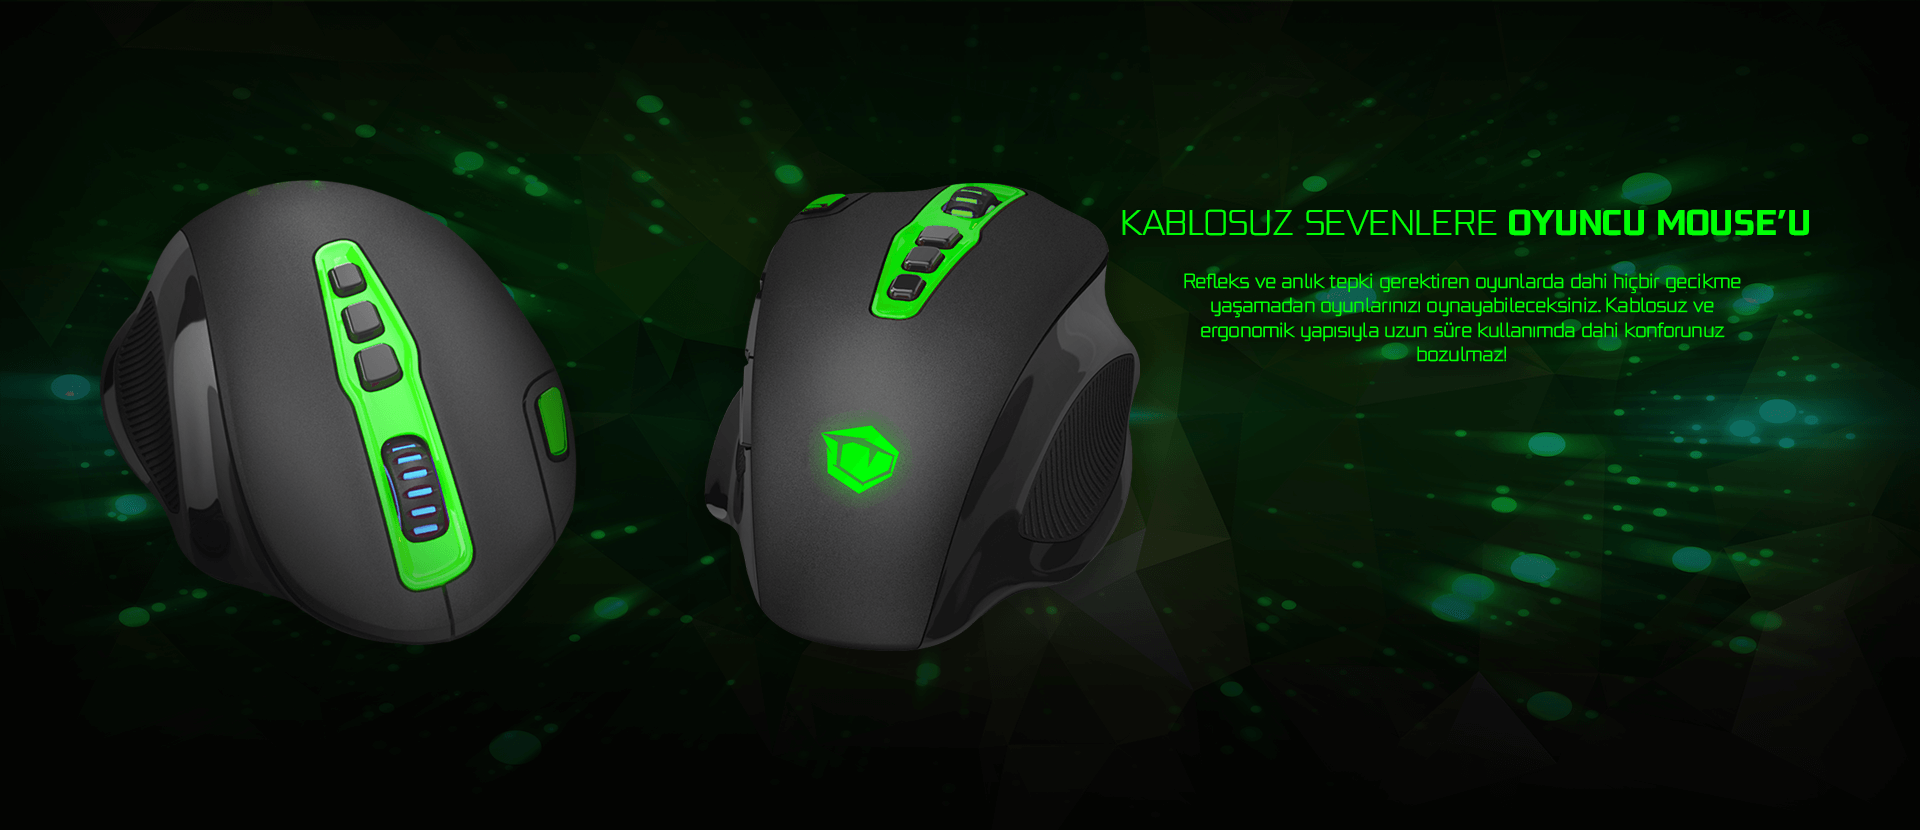 Renegade wireless gaming. Gaming Mouse model v7. G6 Gaming Mouse Китай программа. Pwnage Stormbreaker Magnesium Wireless Gaming Mouse.